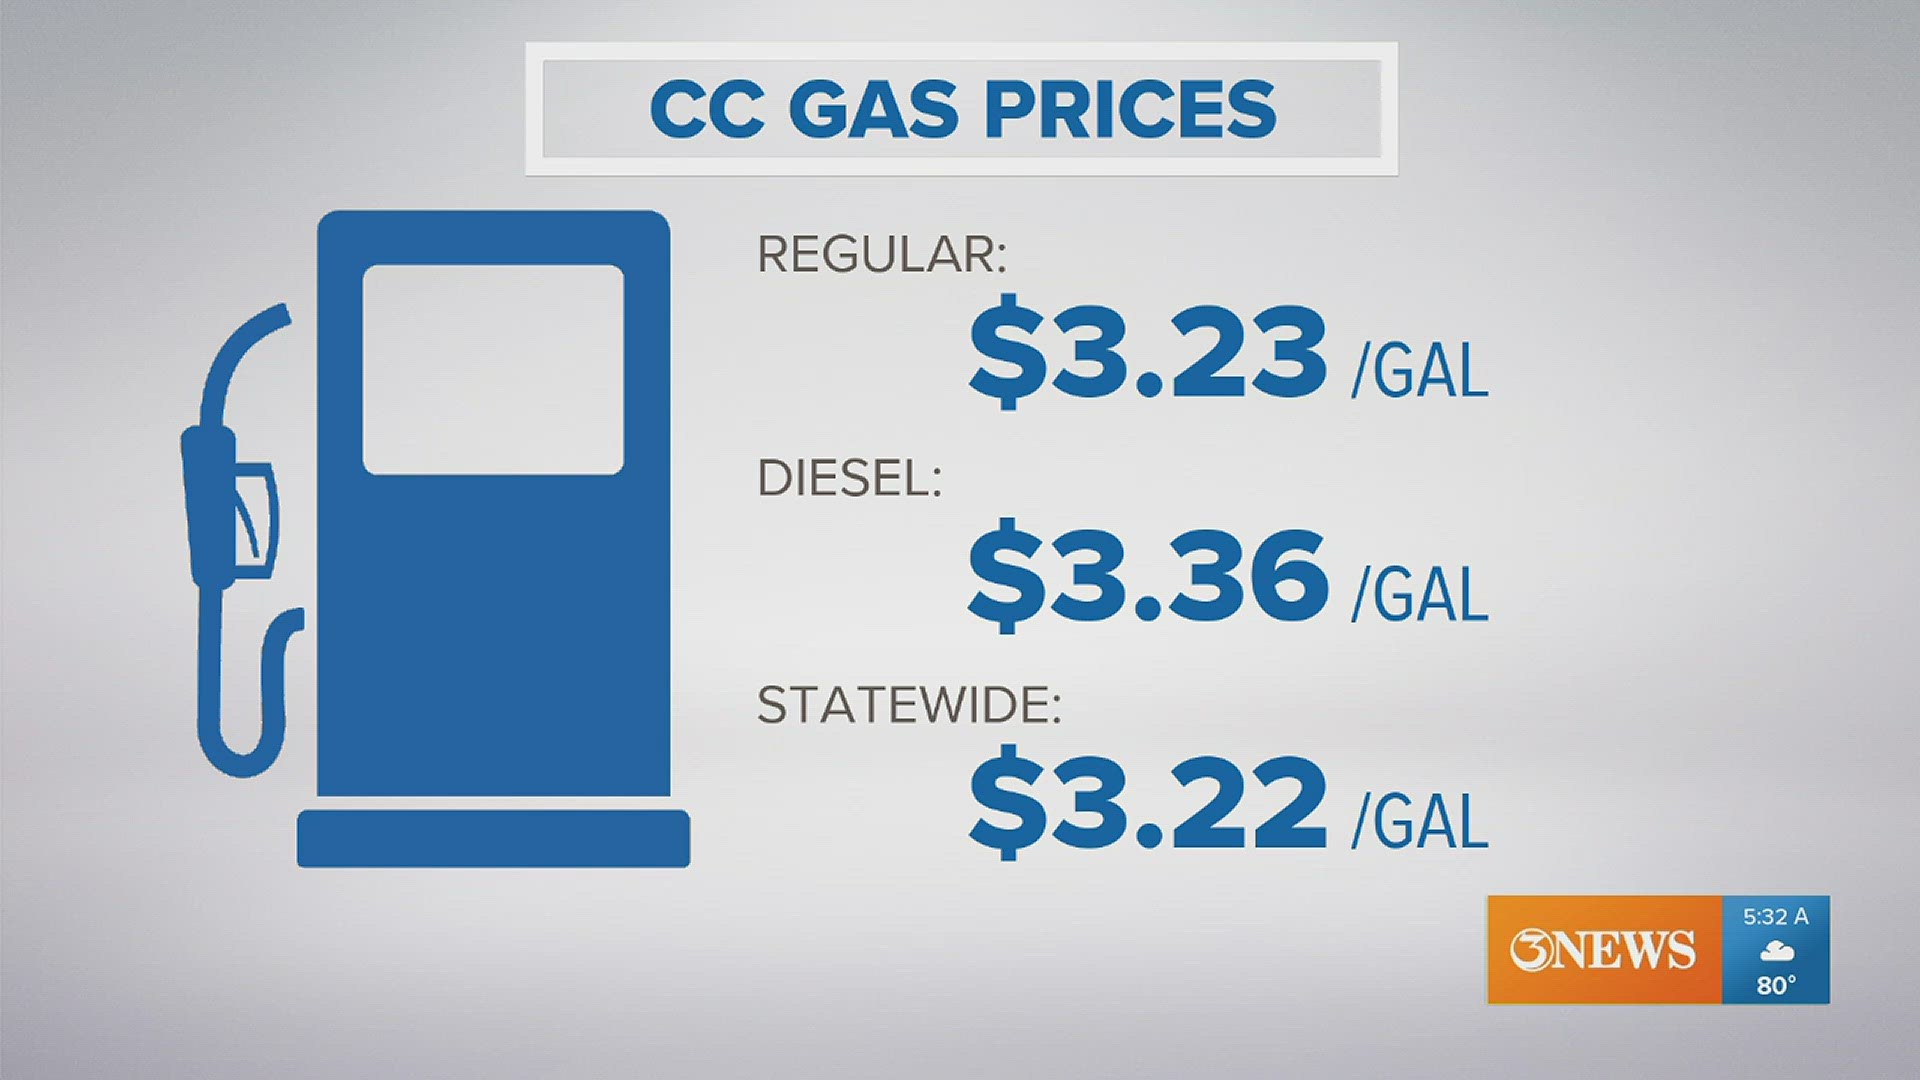 Corpus Christi is seeing about a $.25 increase in gas prices Monday.